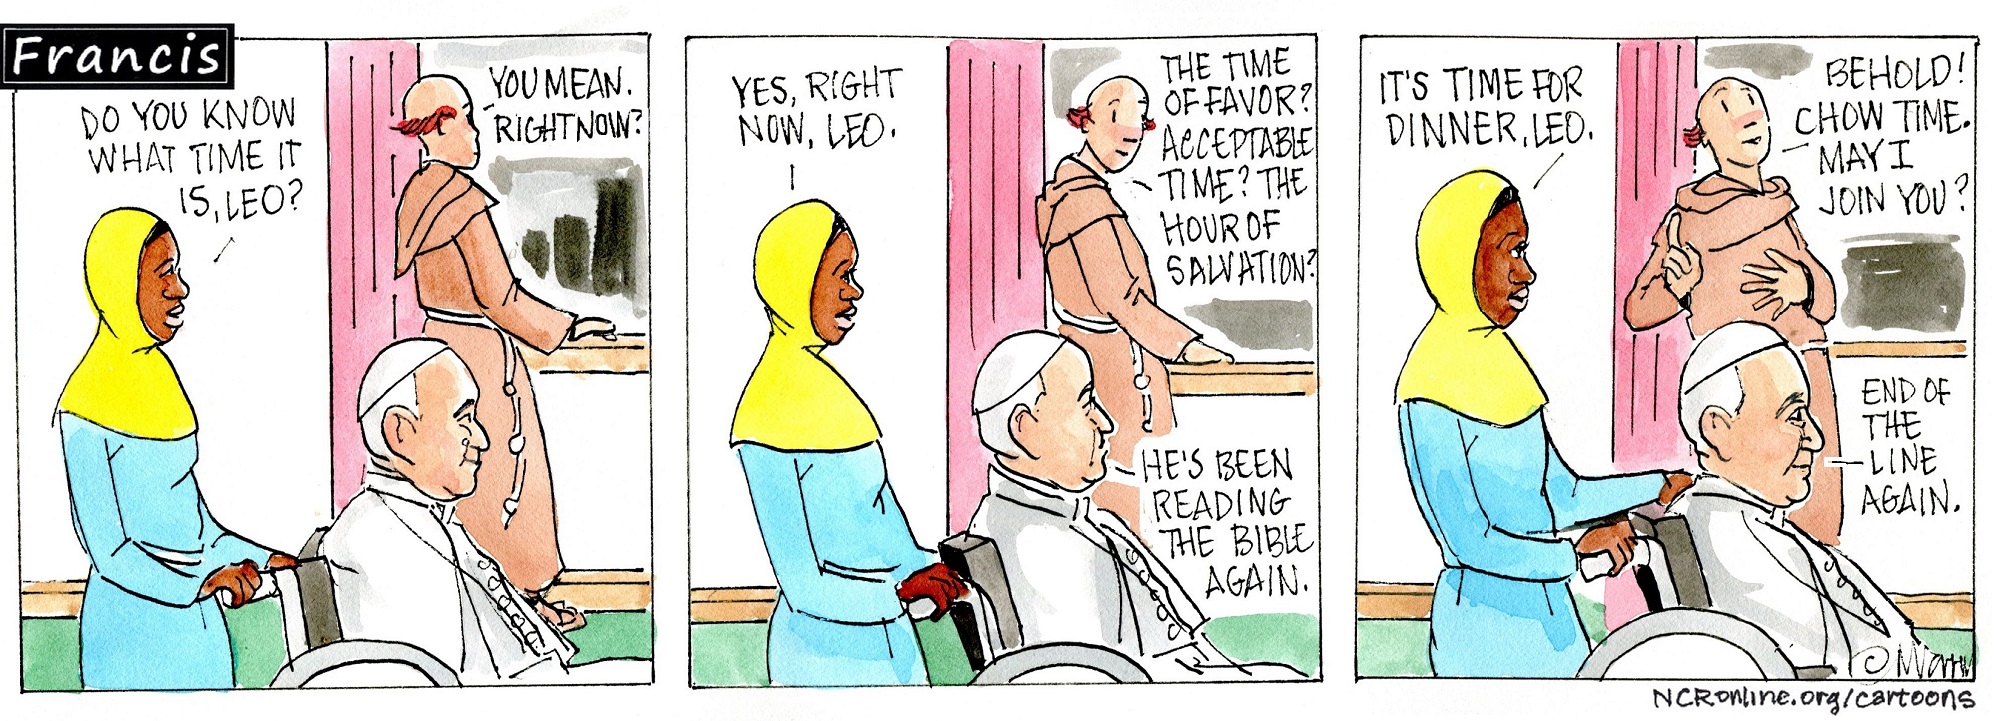 Francis, the comic strip: asking the time